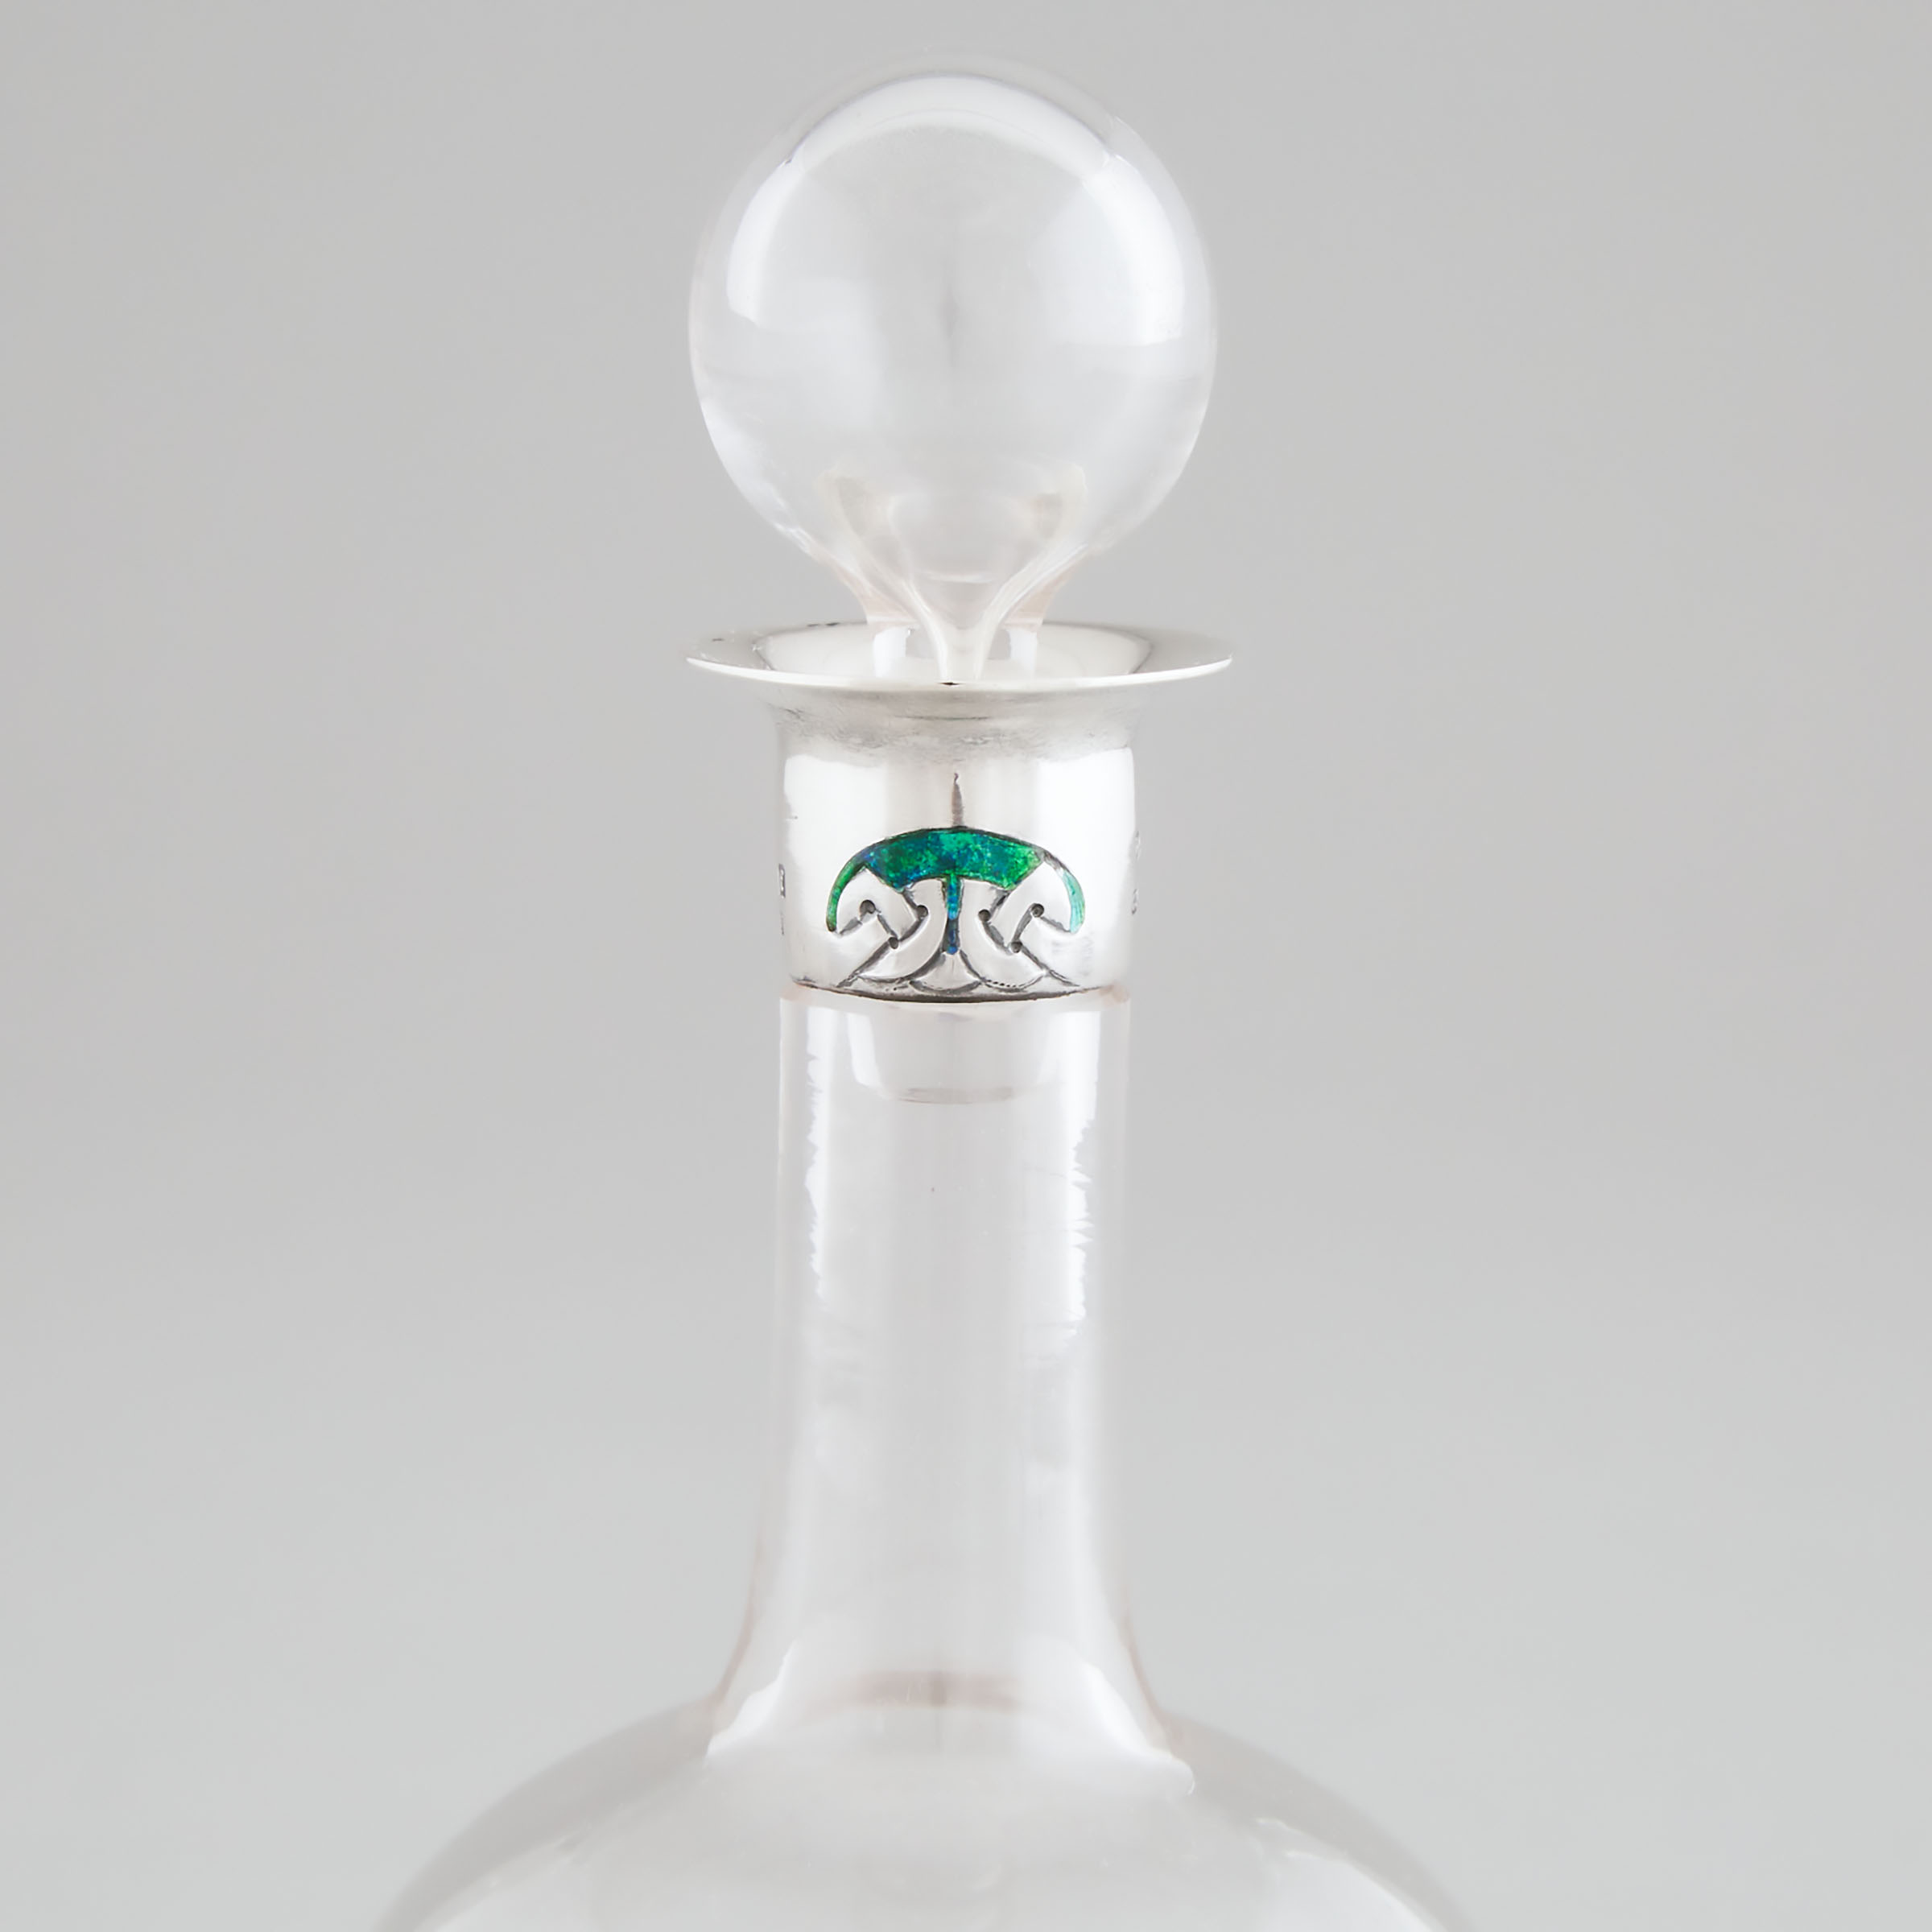 Edwardian Arts & Crafts 'Cymric' Enameled Silver Mounted Glass Decanter, Archibald Knox for Liberty & Co., Birmingham, 1905